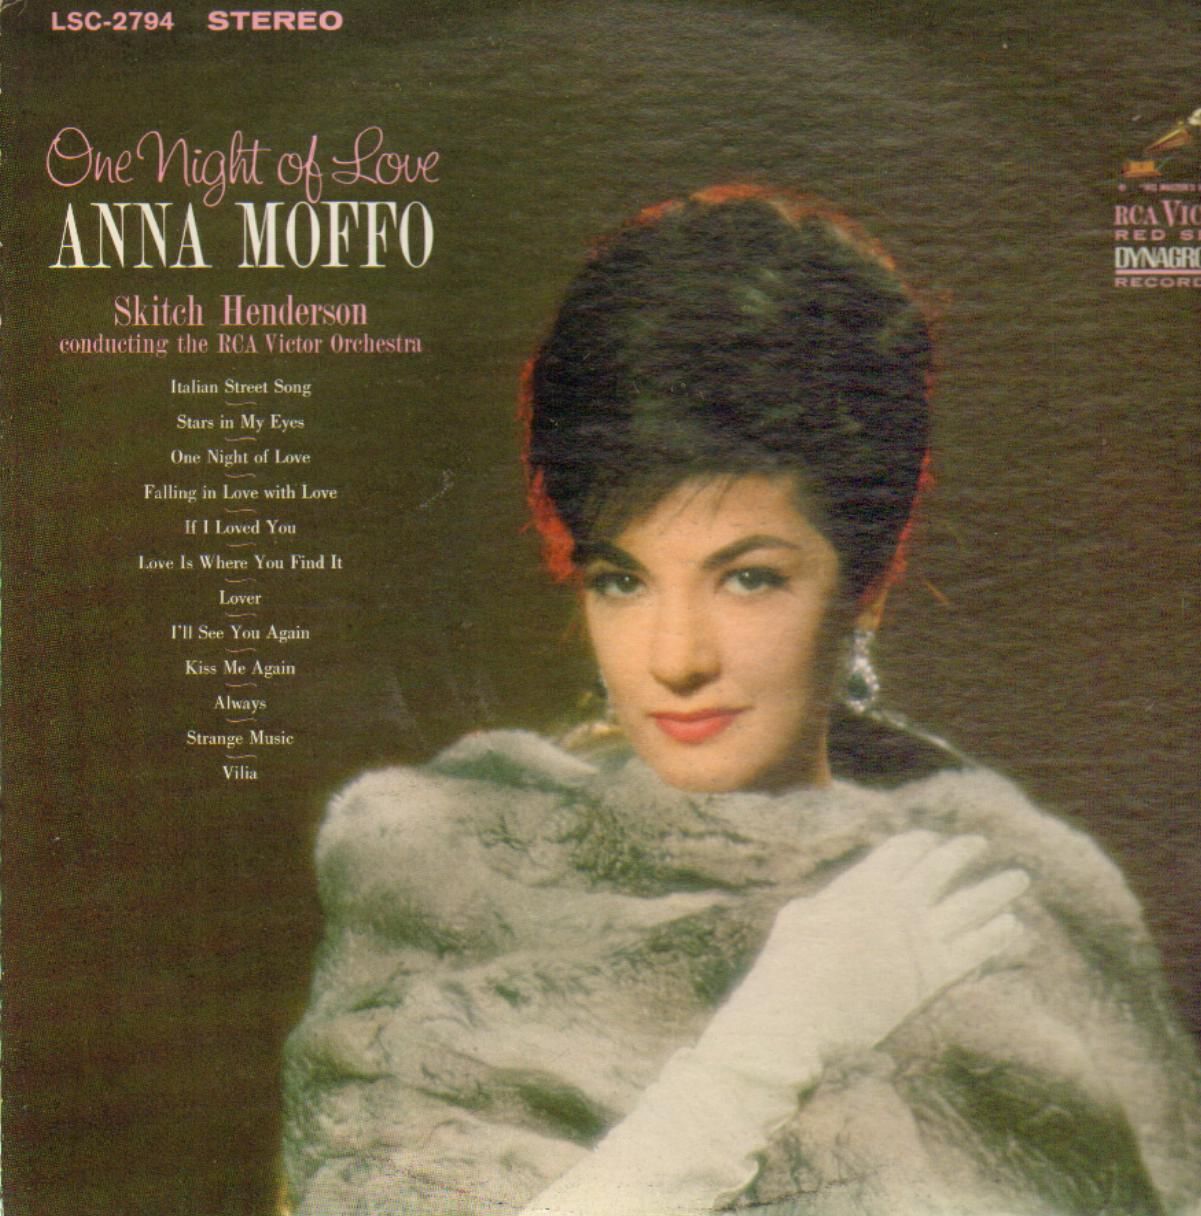 images-of-anna-moffo